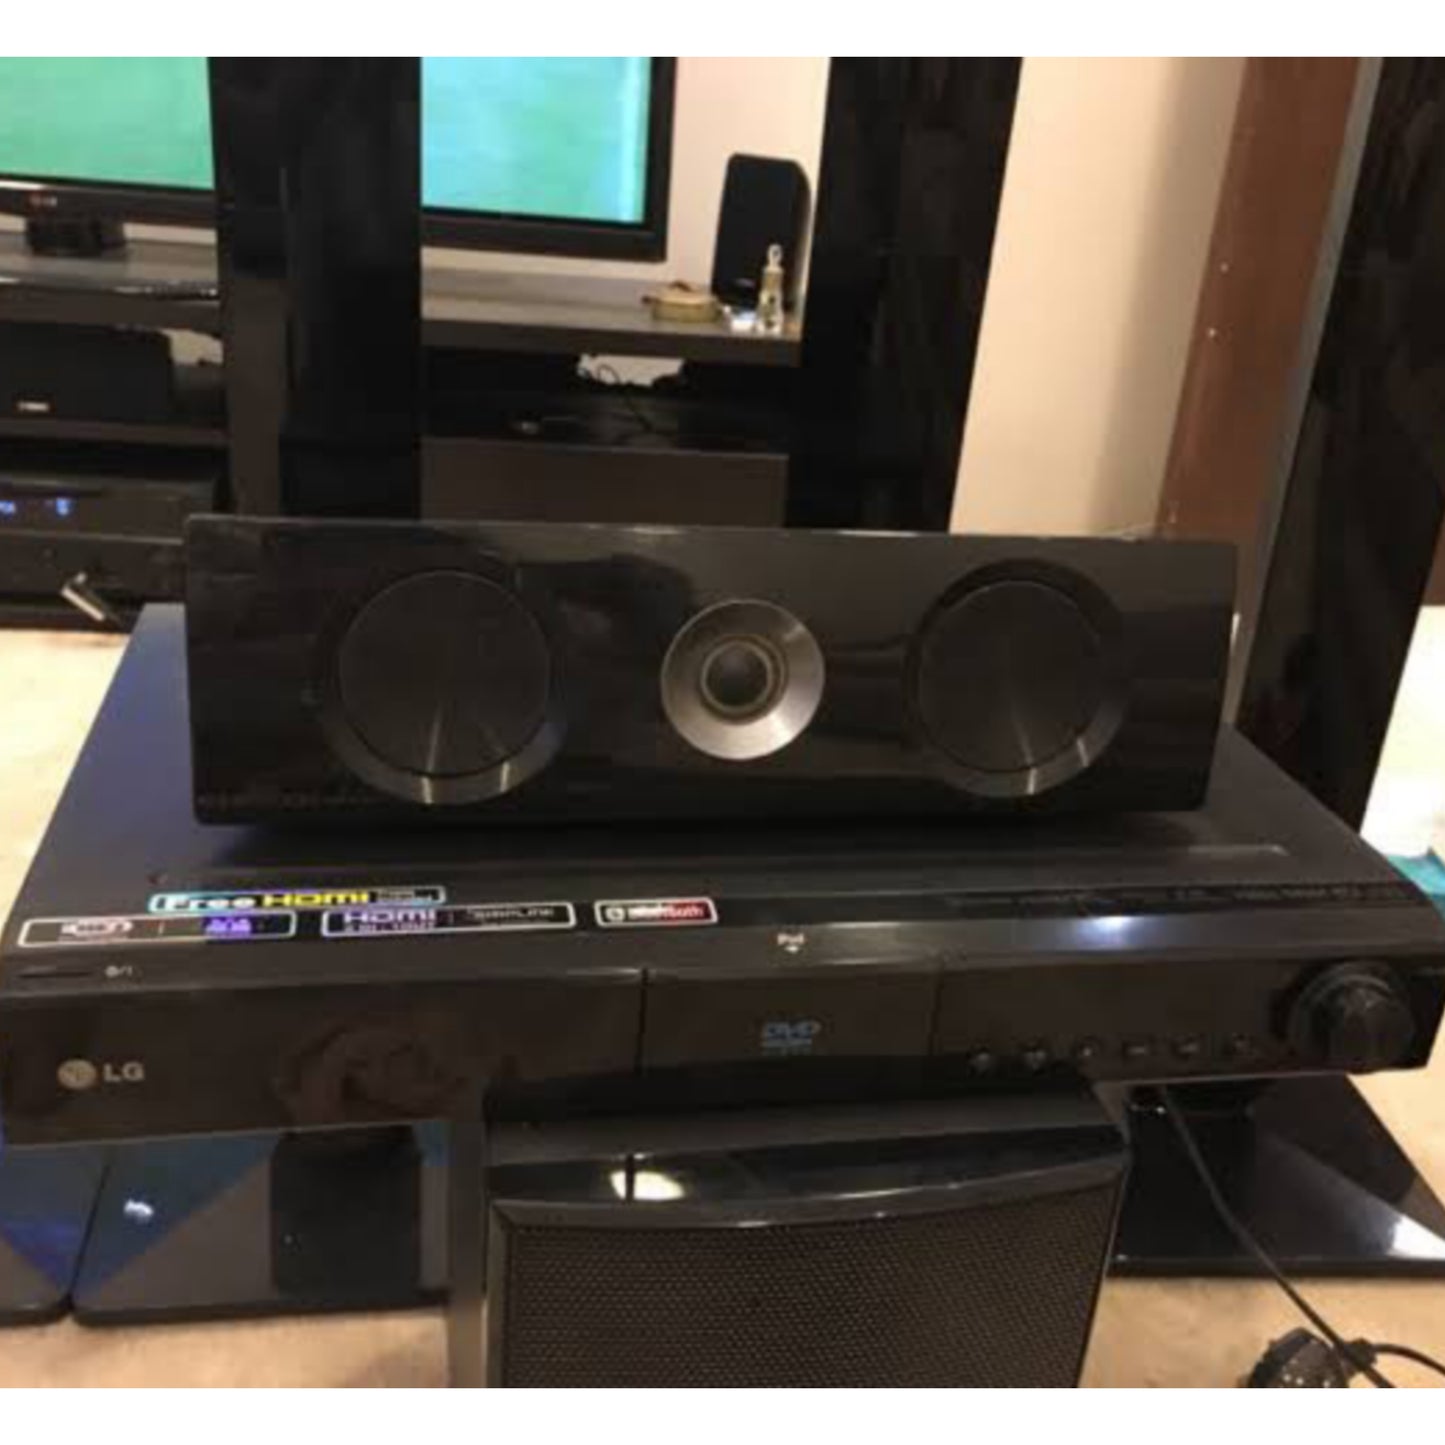 LG HT906TA 5.1Ch 1100W Tower Bluetooth DVD Home Theater System - Foreign Used